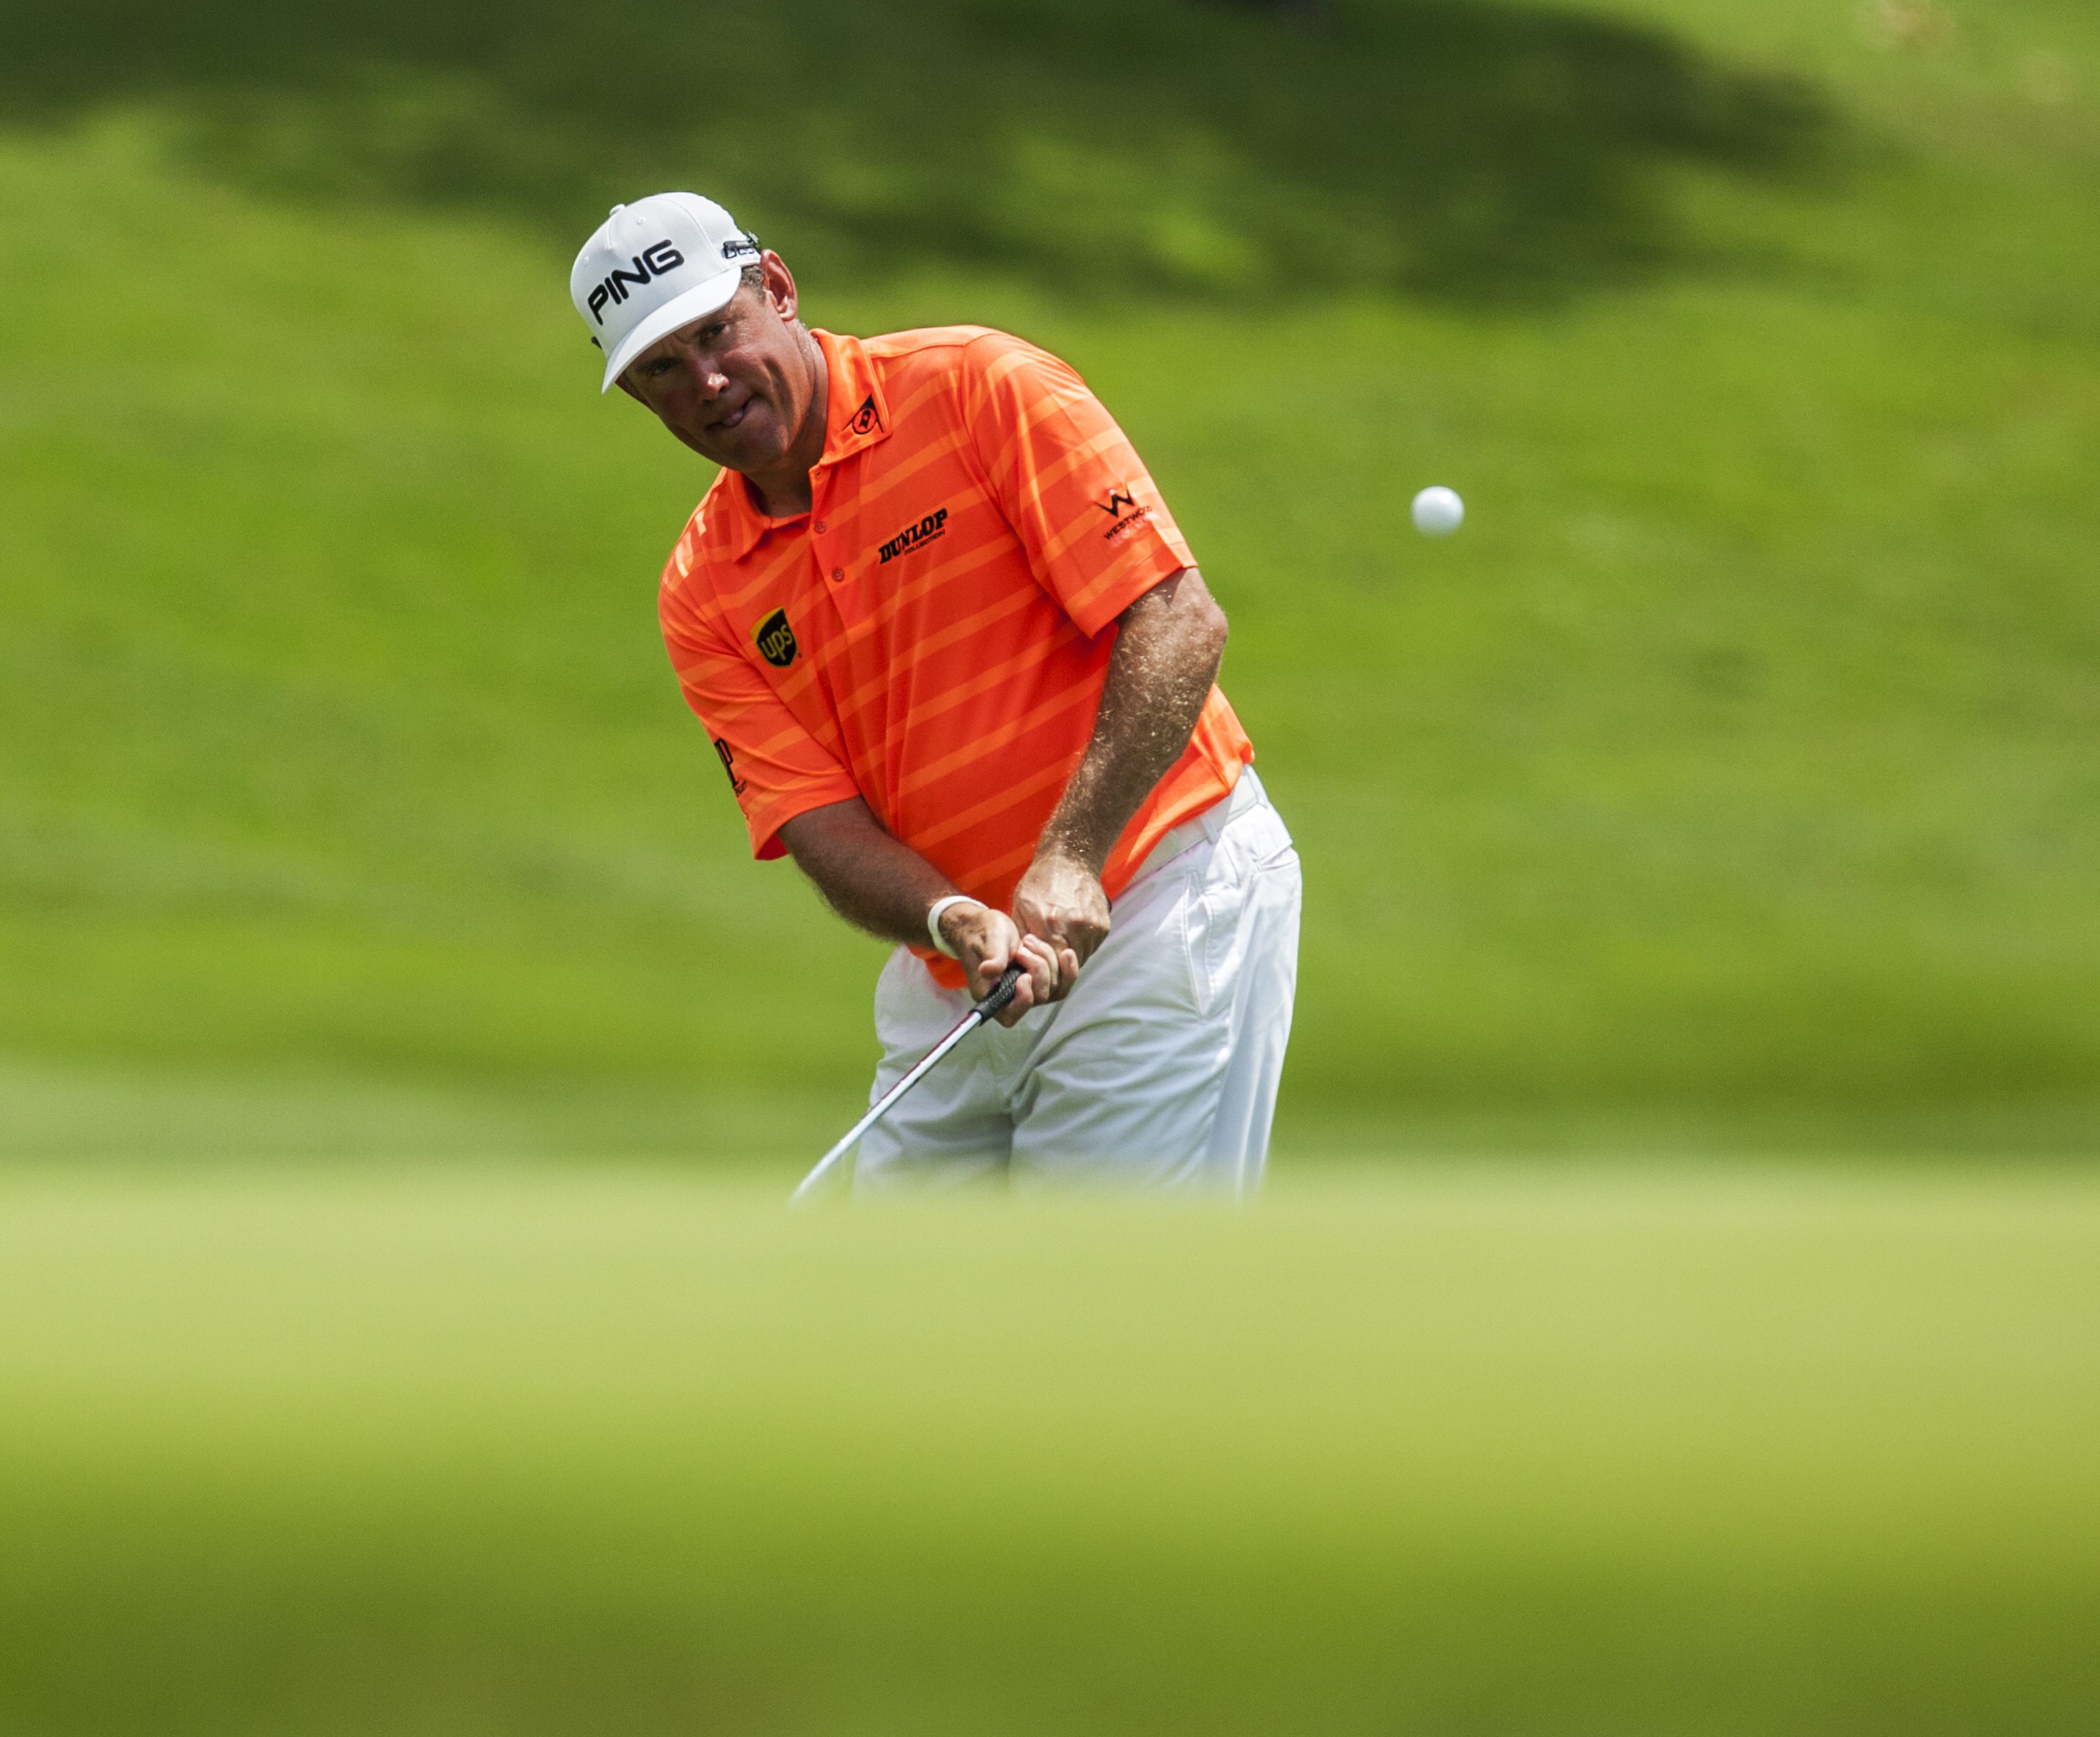 Lee Westwood of Englands plays a green-side shot during the third round of the Maybank Malaysian Open golf tournament in Kuala Lumpur. Photo: EPA